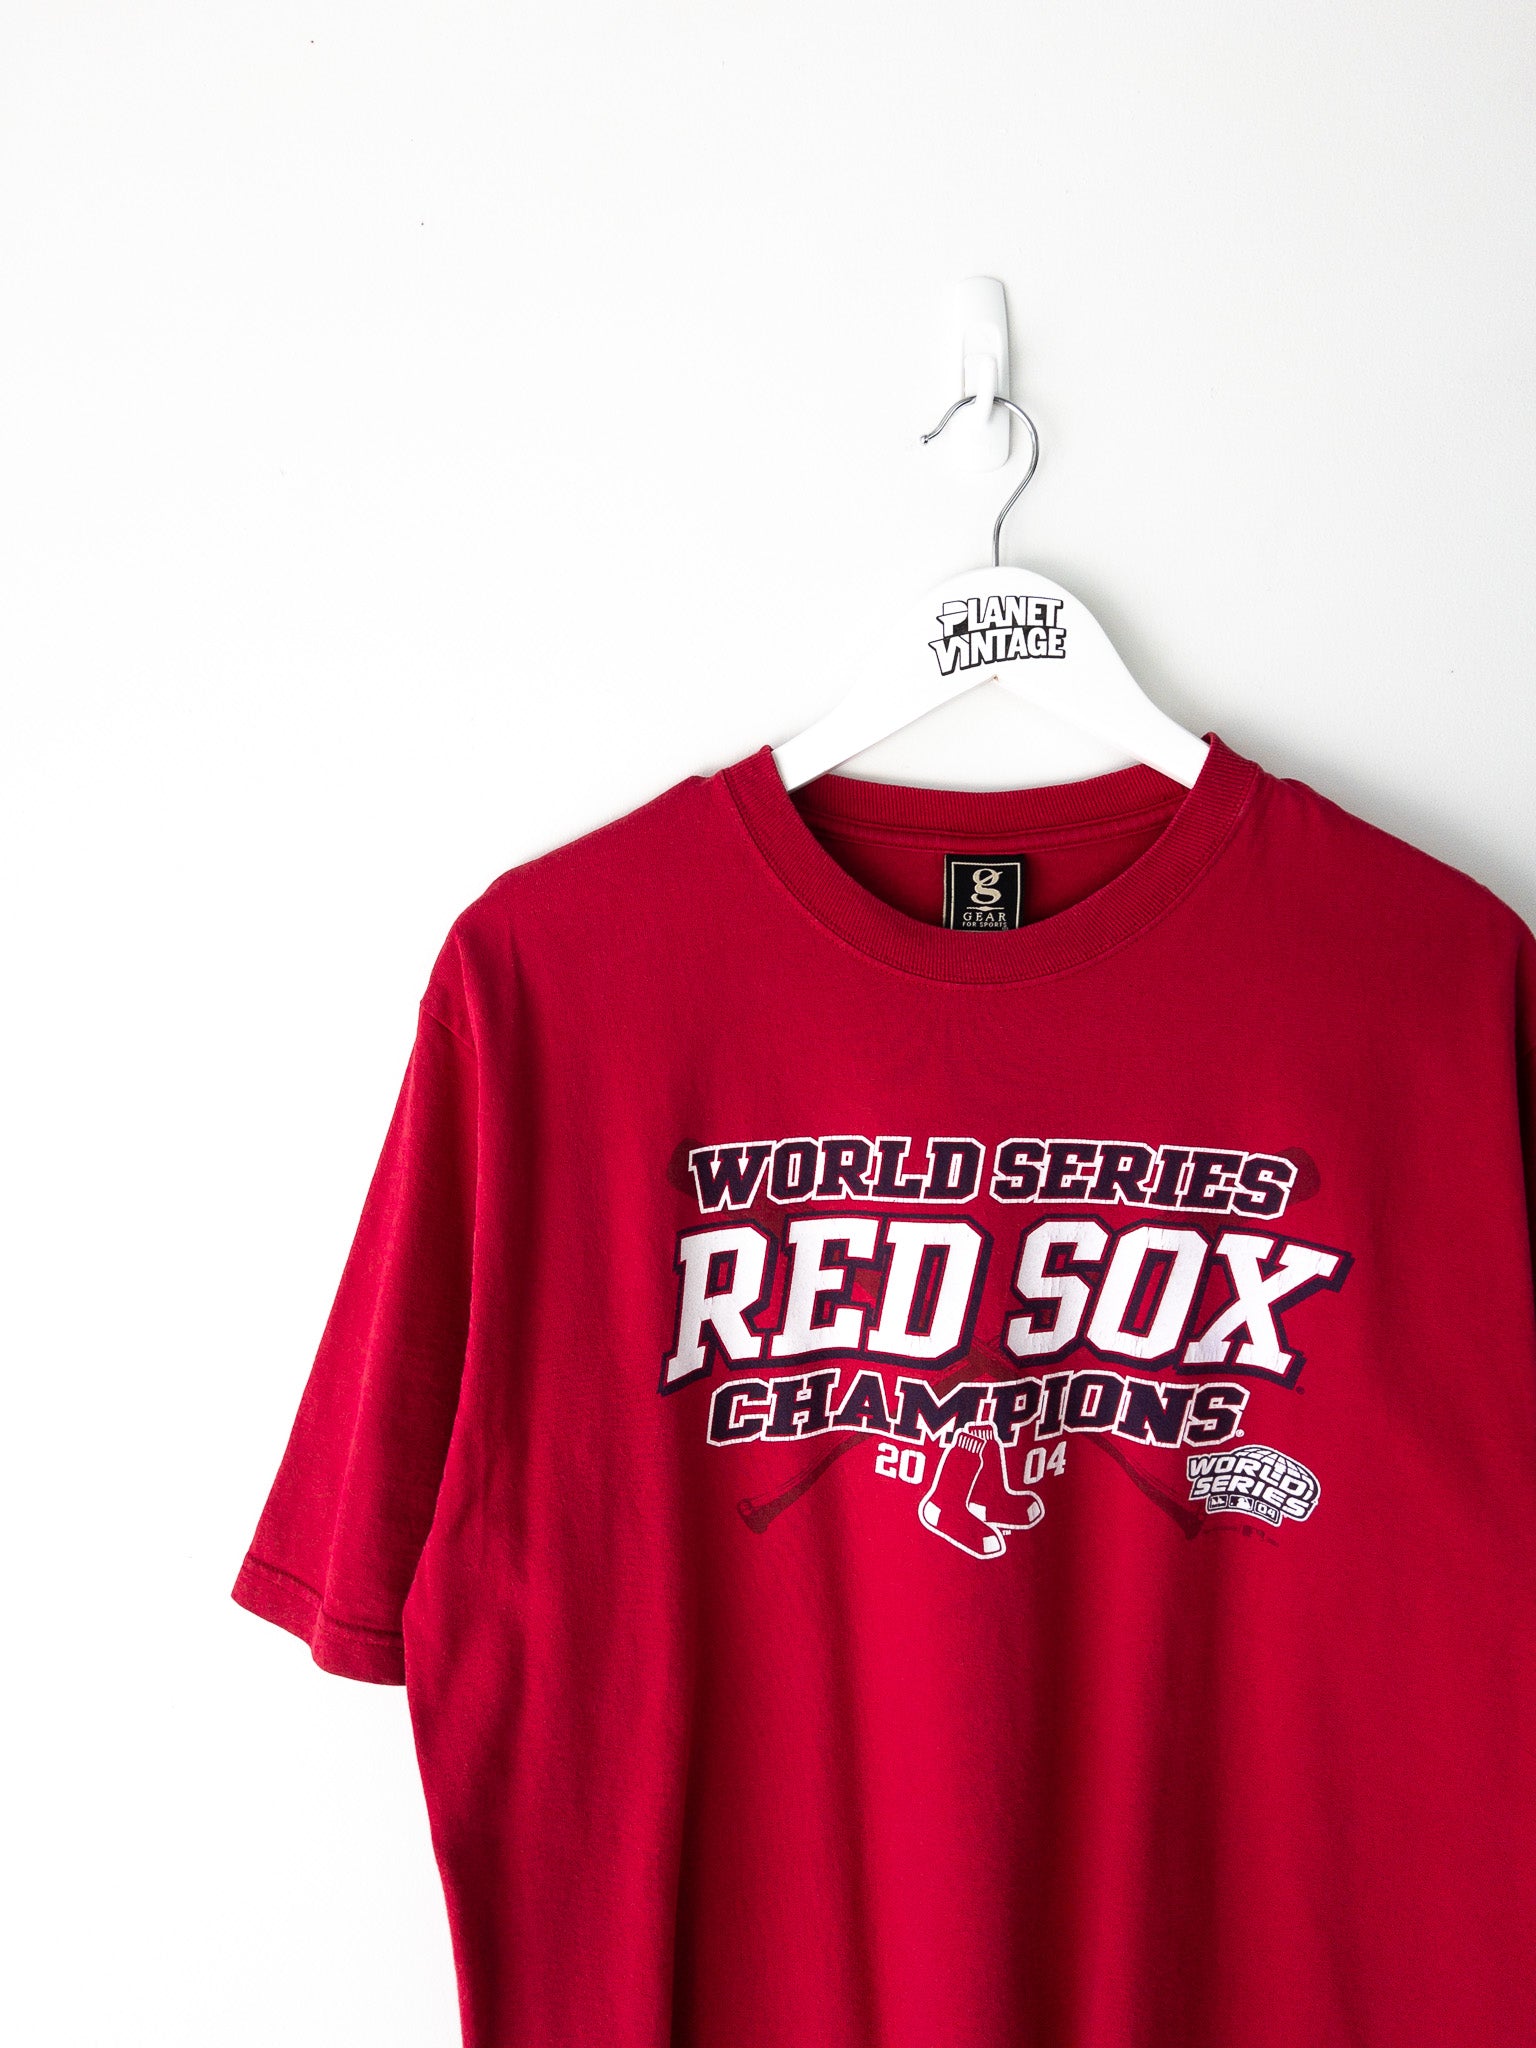 Vintage Red Sox World Series Champs Tee (L)